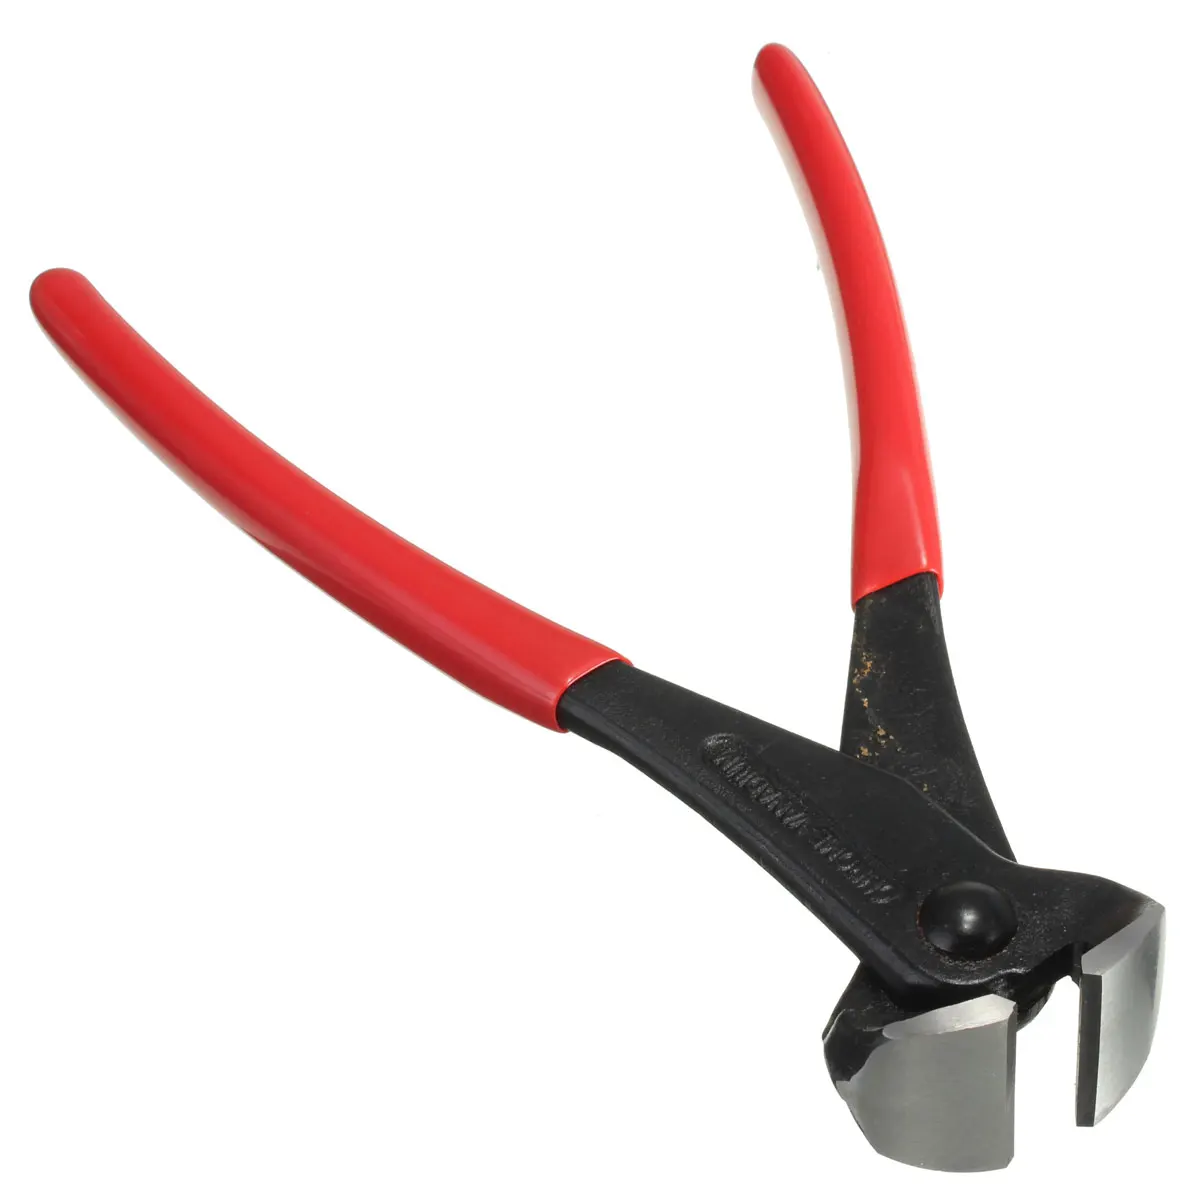 8inch/200mm End Cutter Chrome Steel Red Plastic Fixers Pincers Nail Clipper Multitool Nippers Vanadium Cutting Pliers